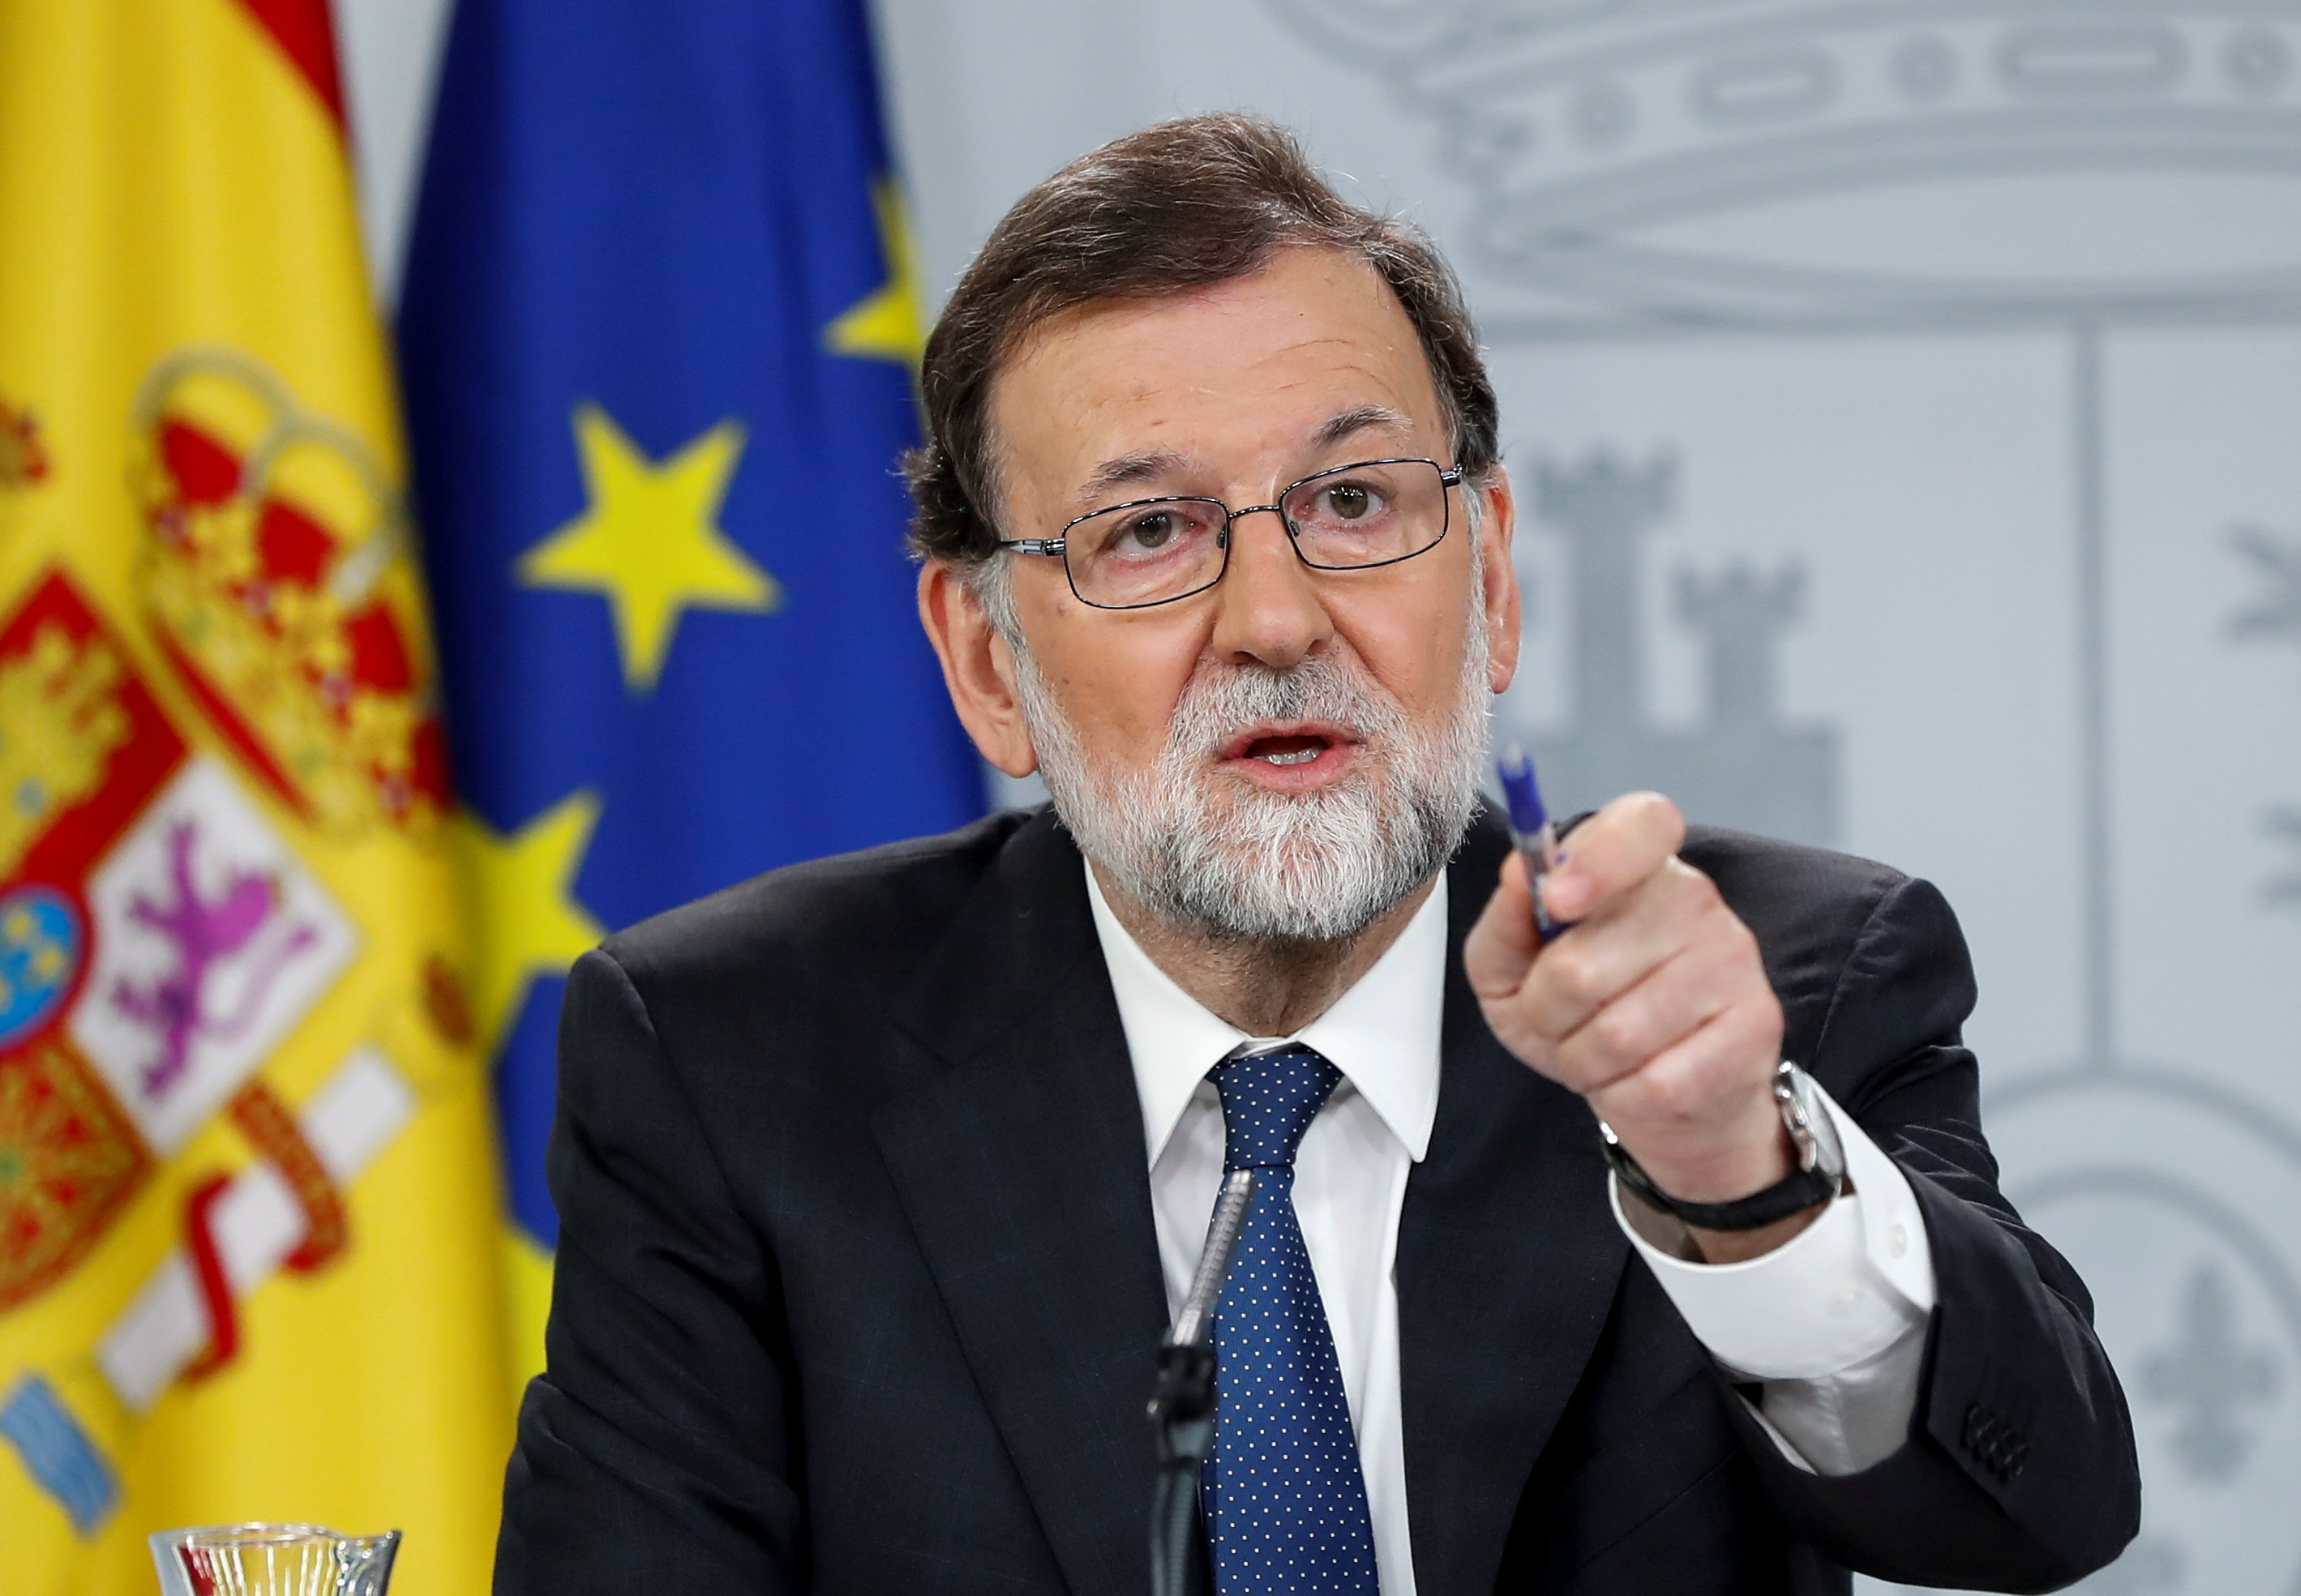 Spanish prime minister faces growing election calls